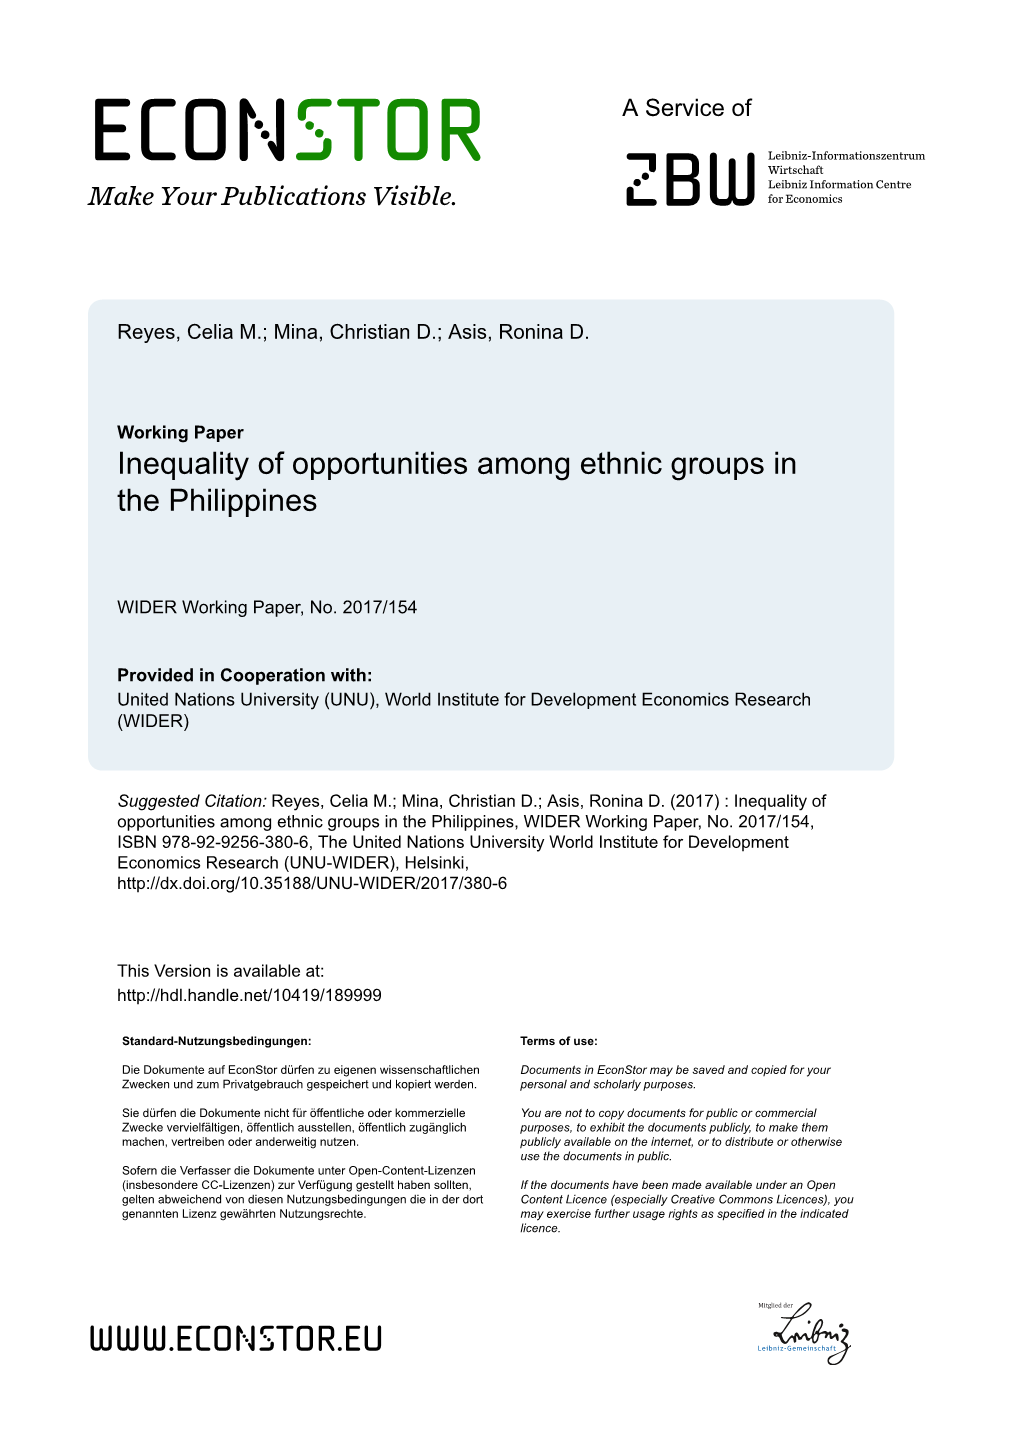 Inequality of Opportunities Among Ethnic Groups in the Philippines